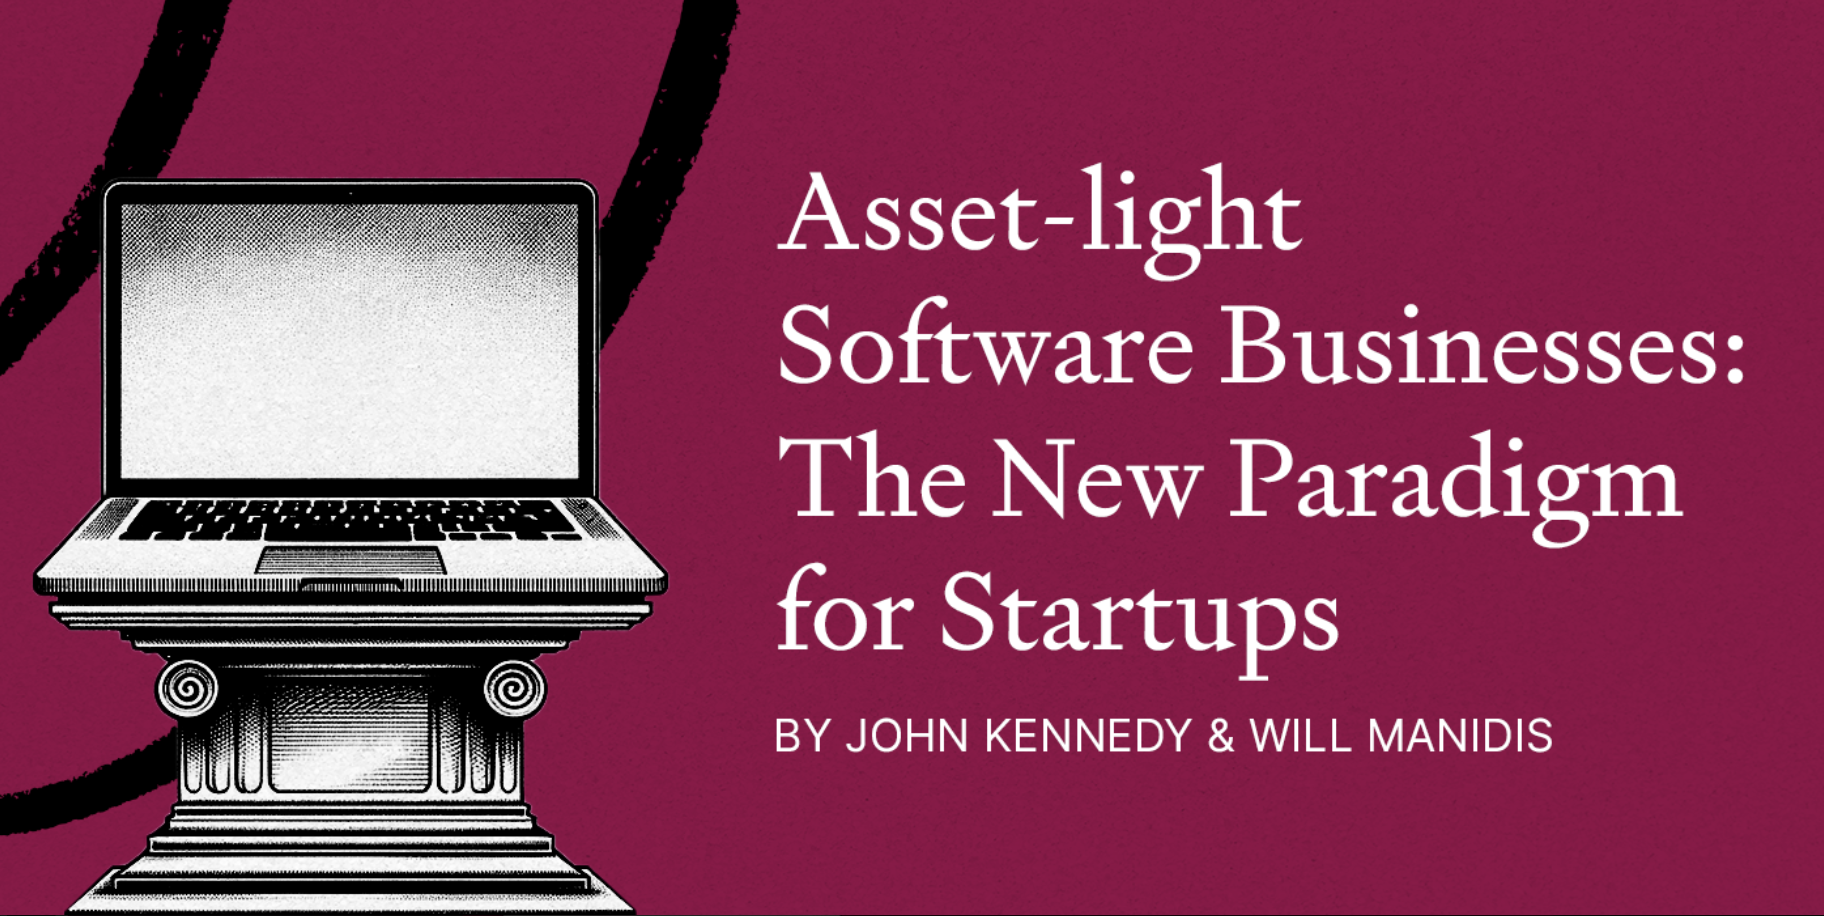 Asset-light Software Businesses: The New Paradigm for Startups